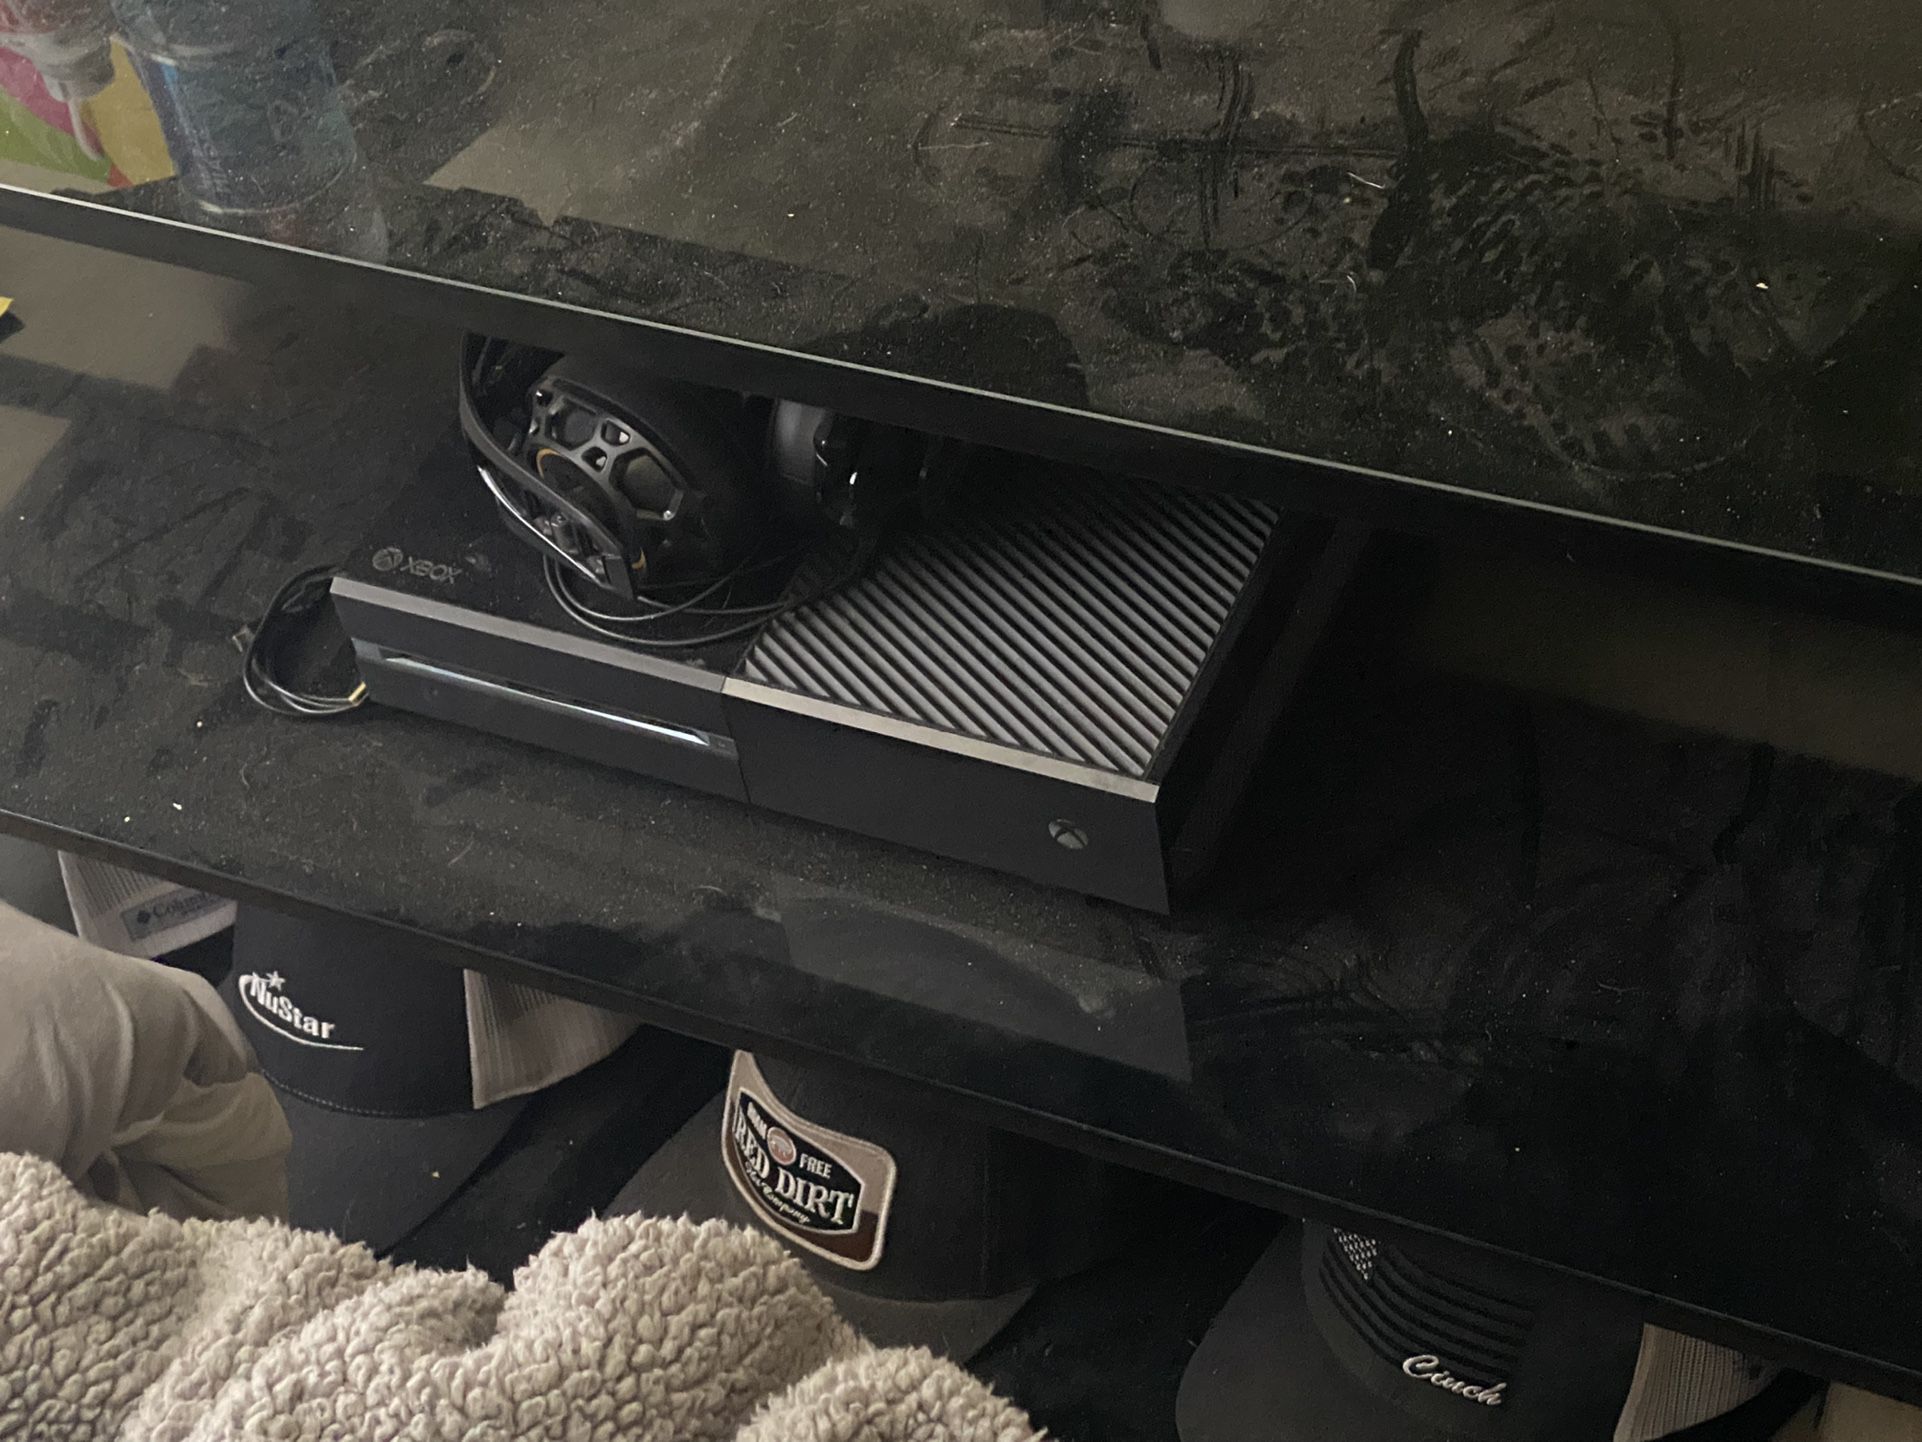 Tv, Xbox One, Stand